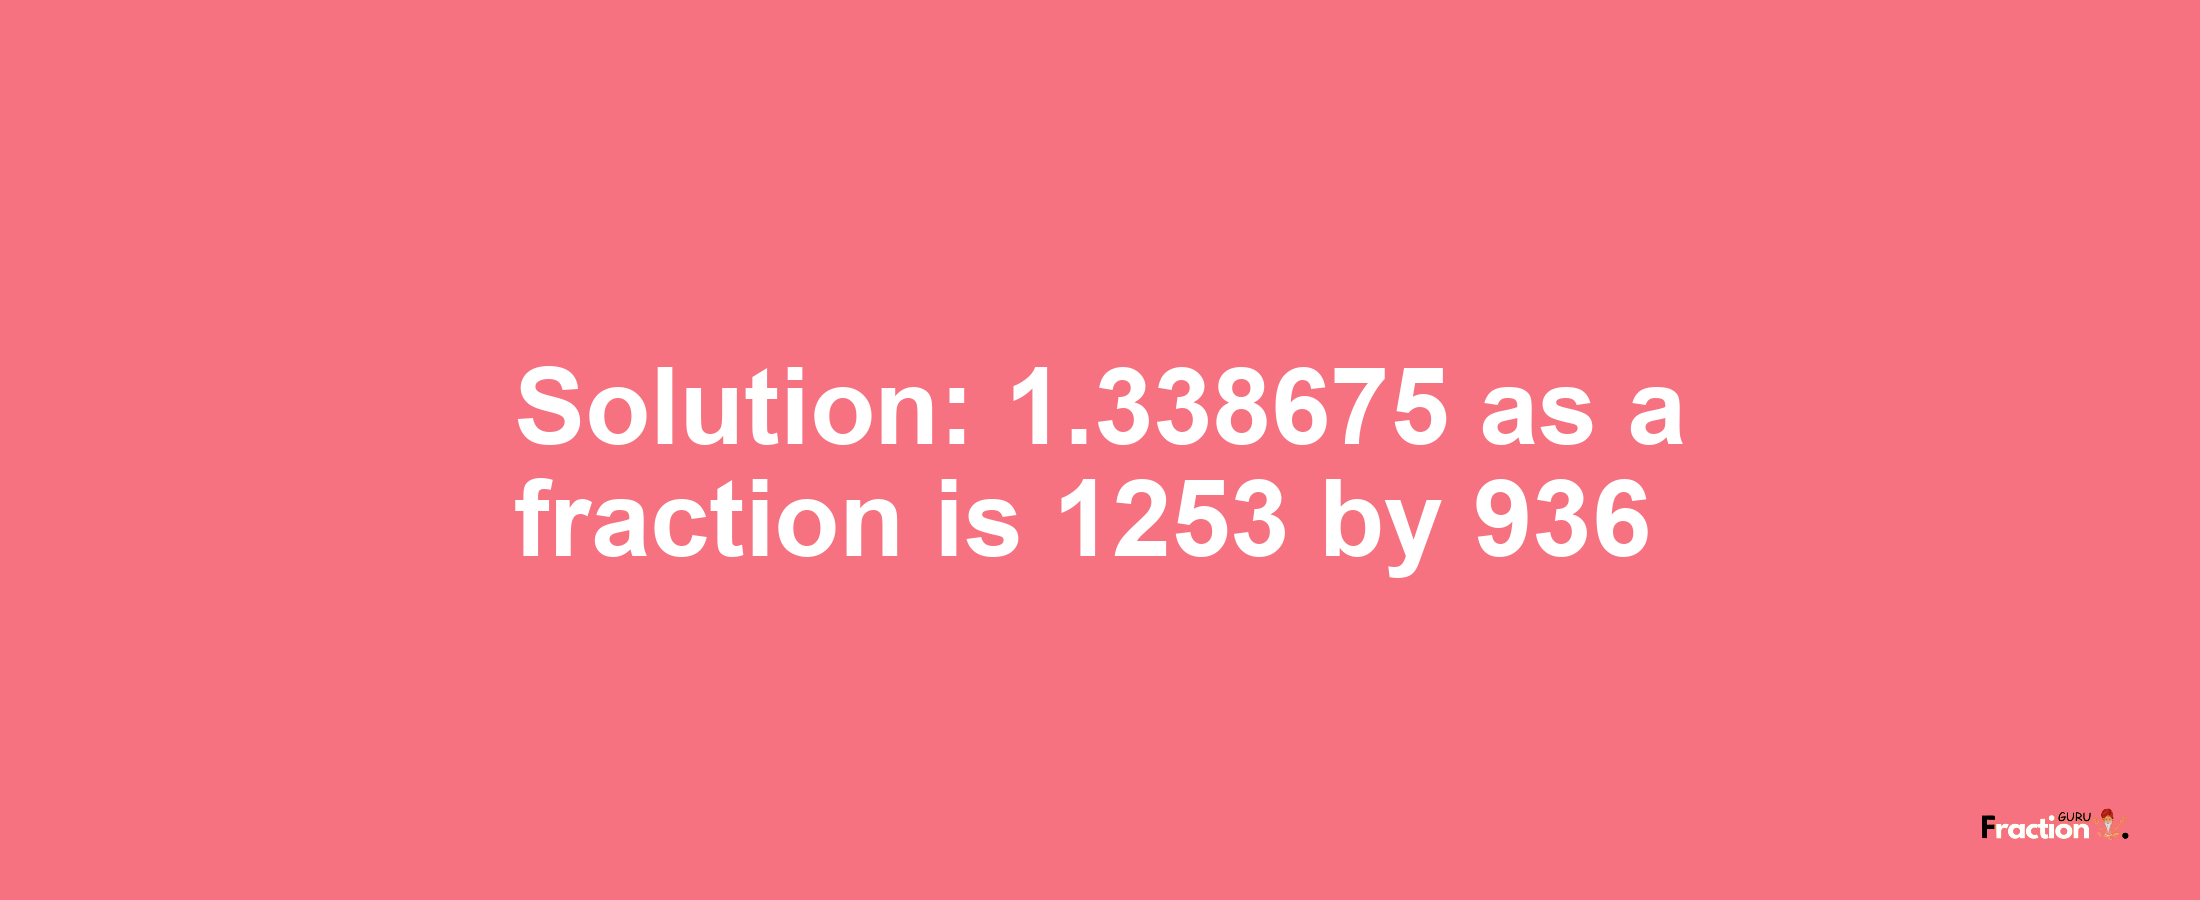 Solution:1.338675 as a fraction is 1253/936